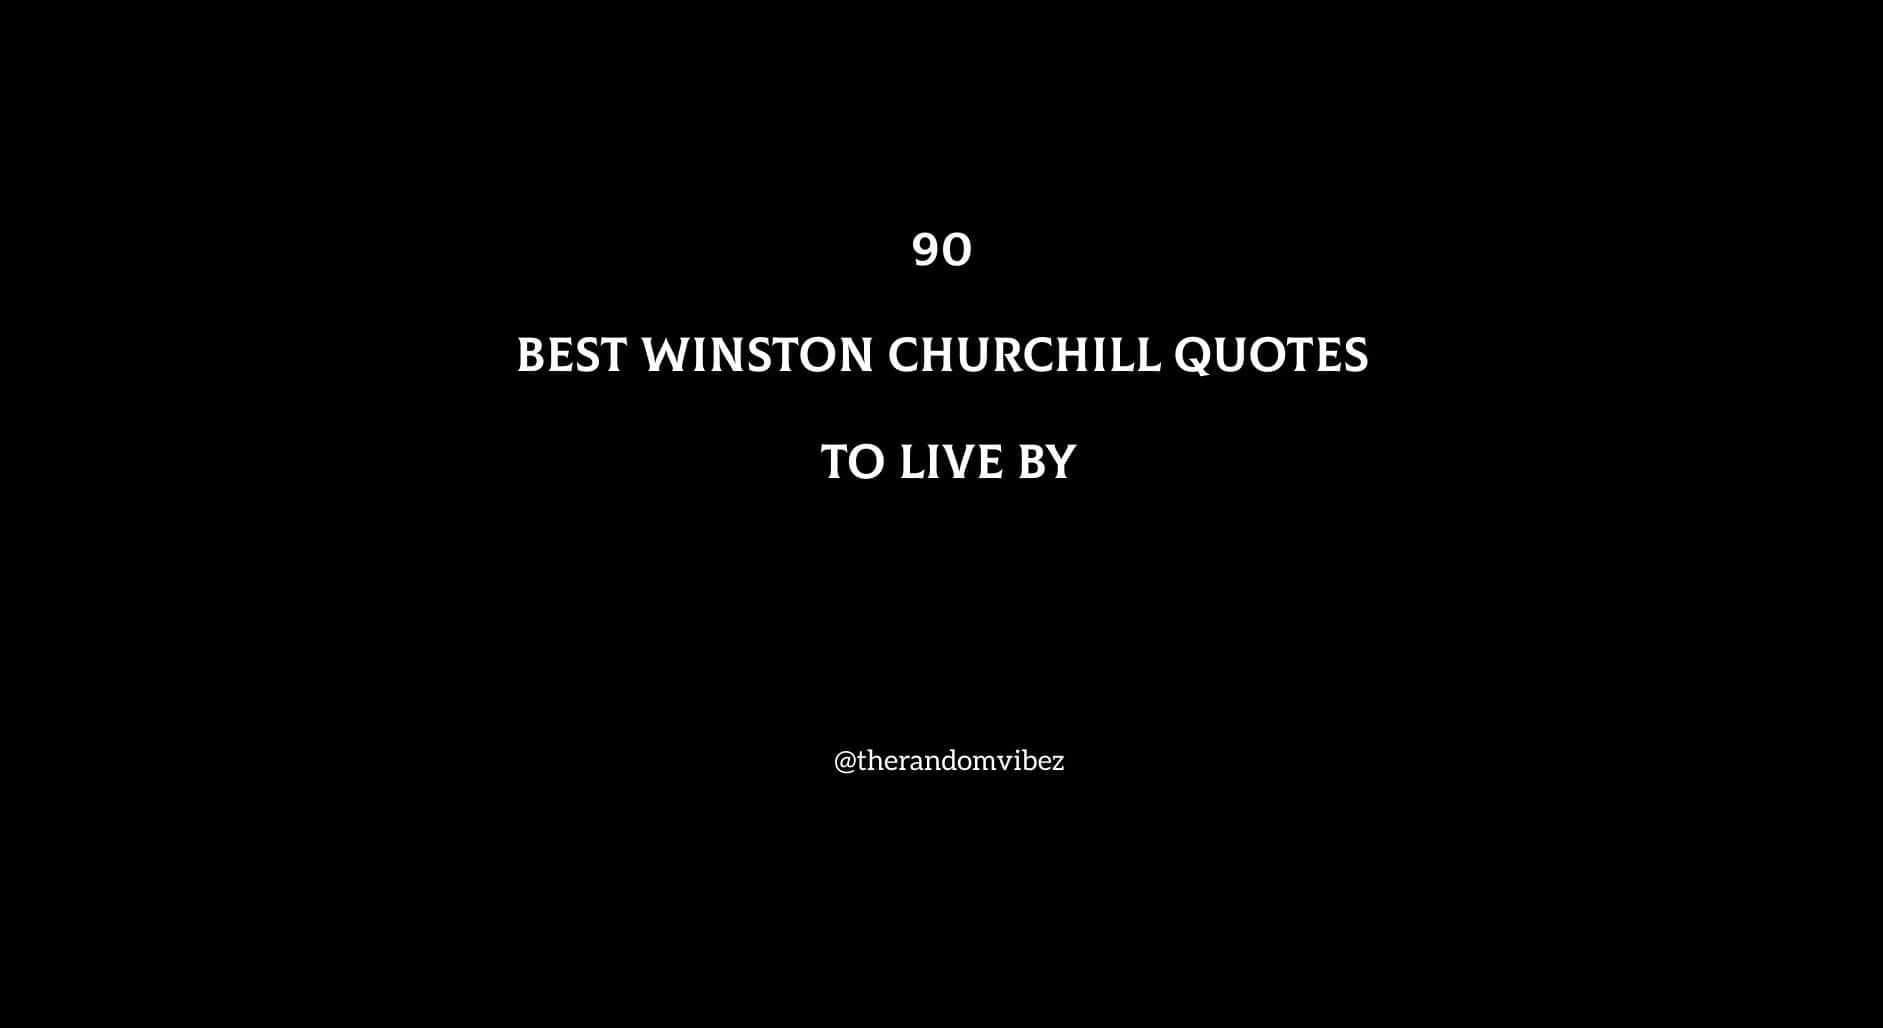 90 Best Winston Churchill Quotes To Live By